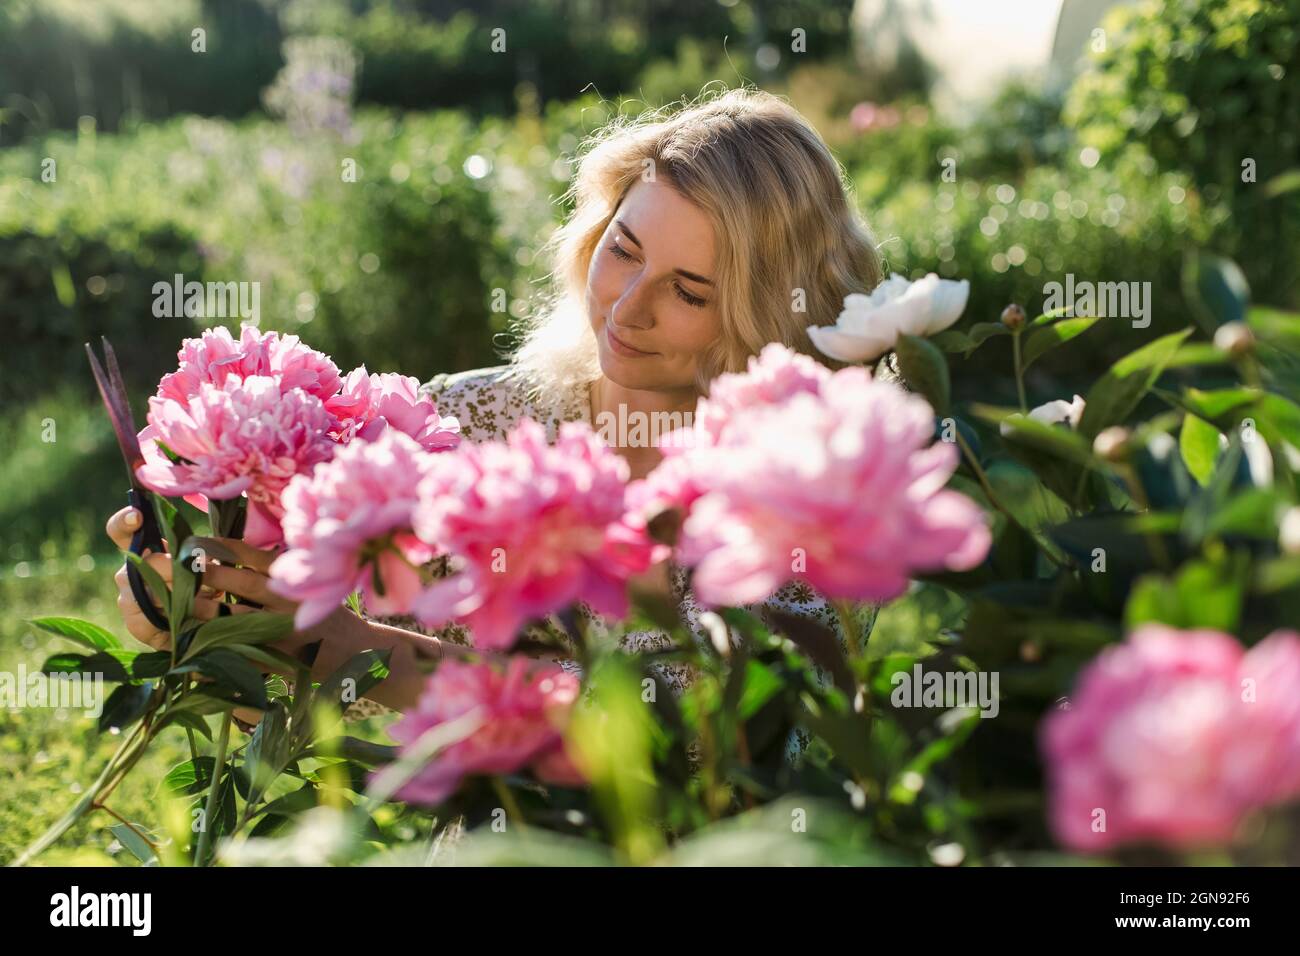 Woman cutting flowers at garden Stock Photo